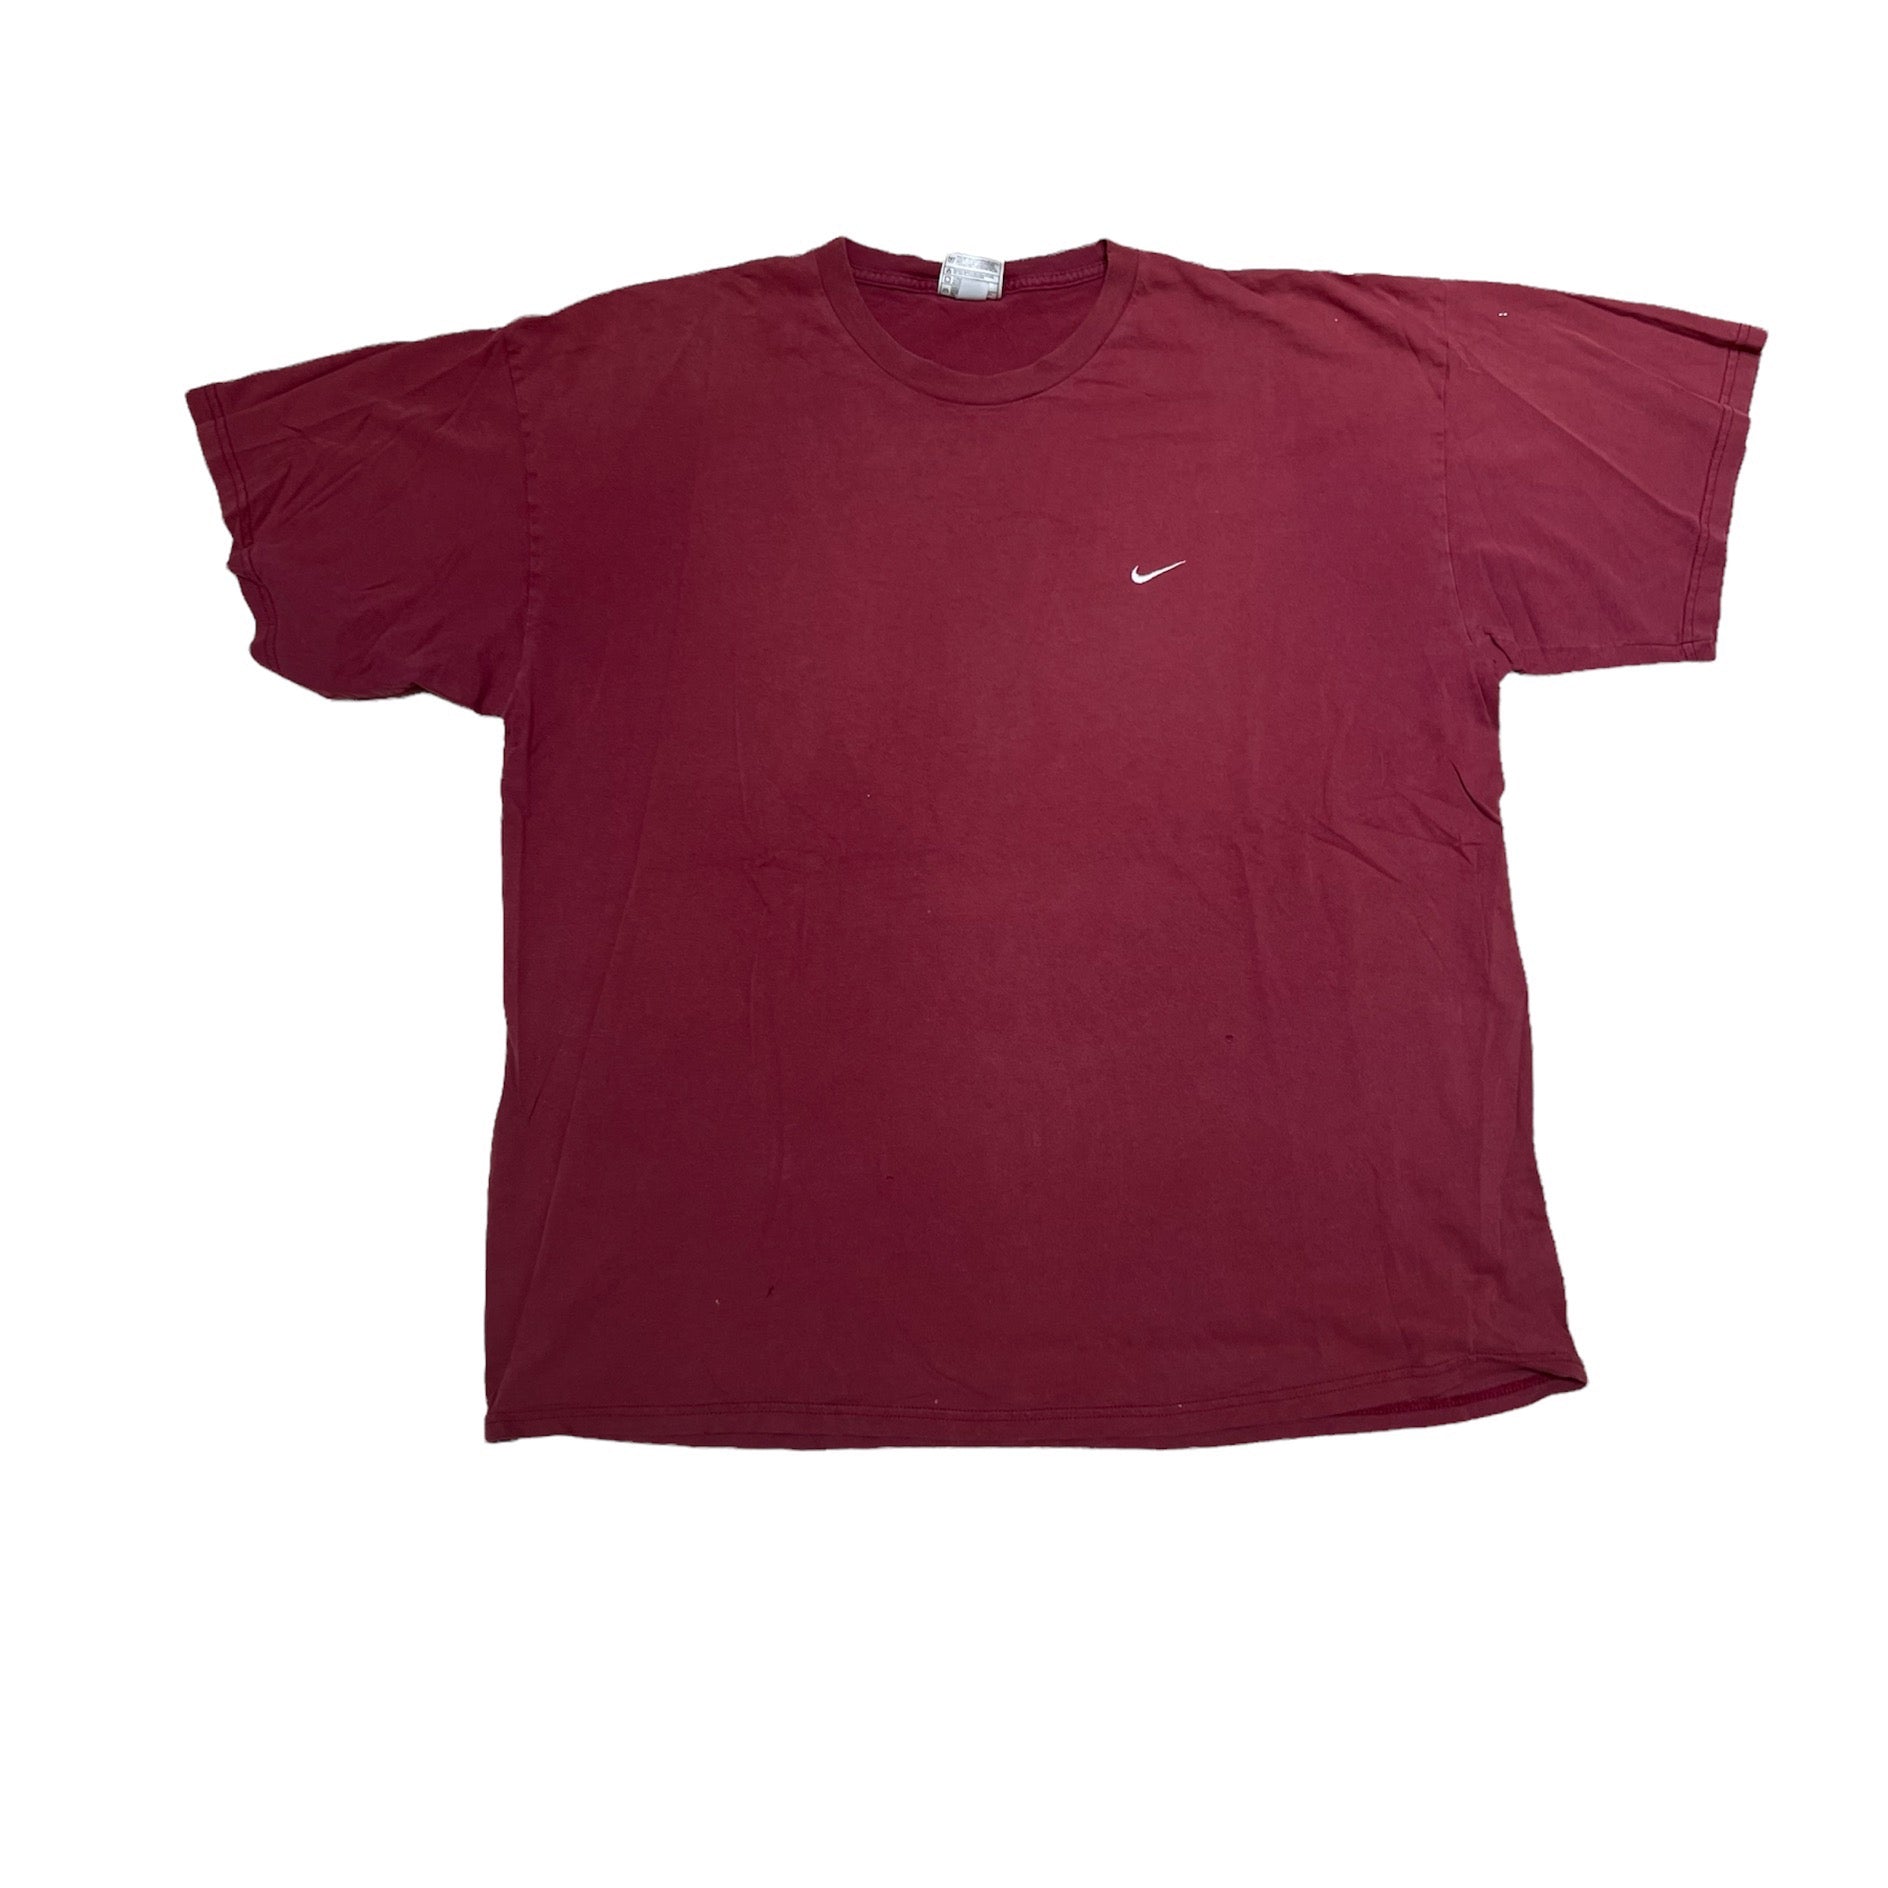 90’S NIKE SIDE CHECK RED TEE